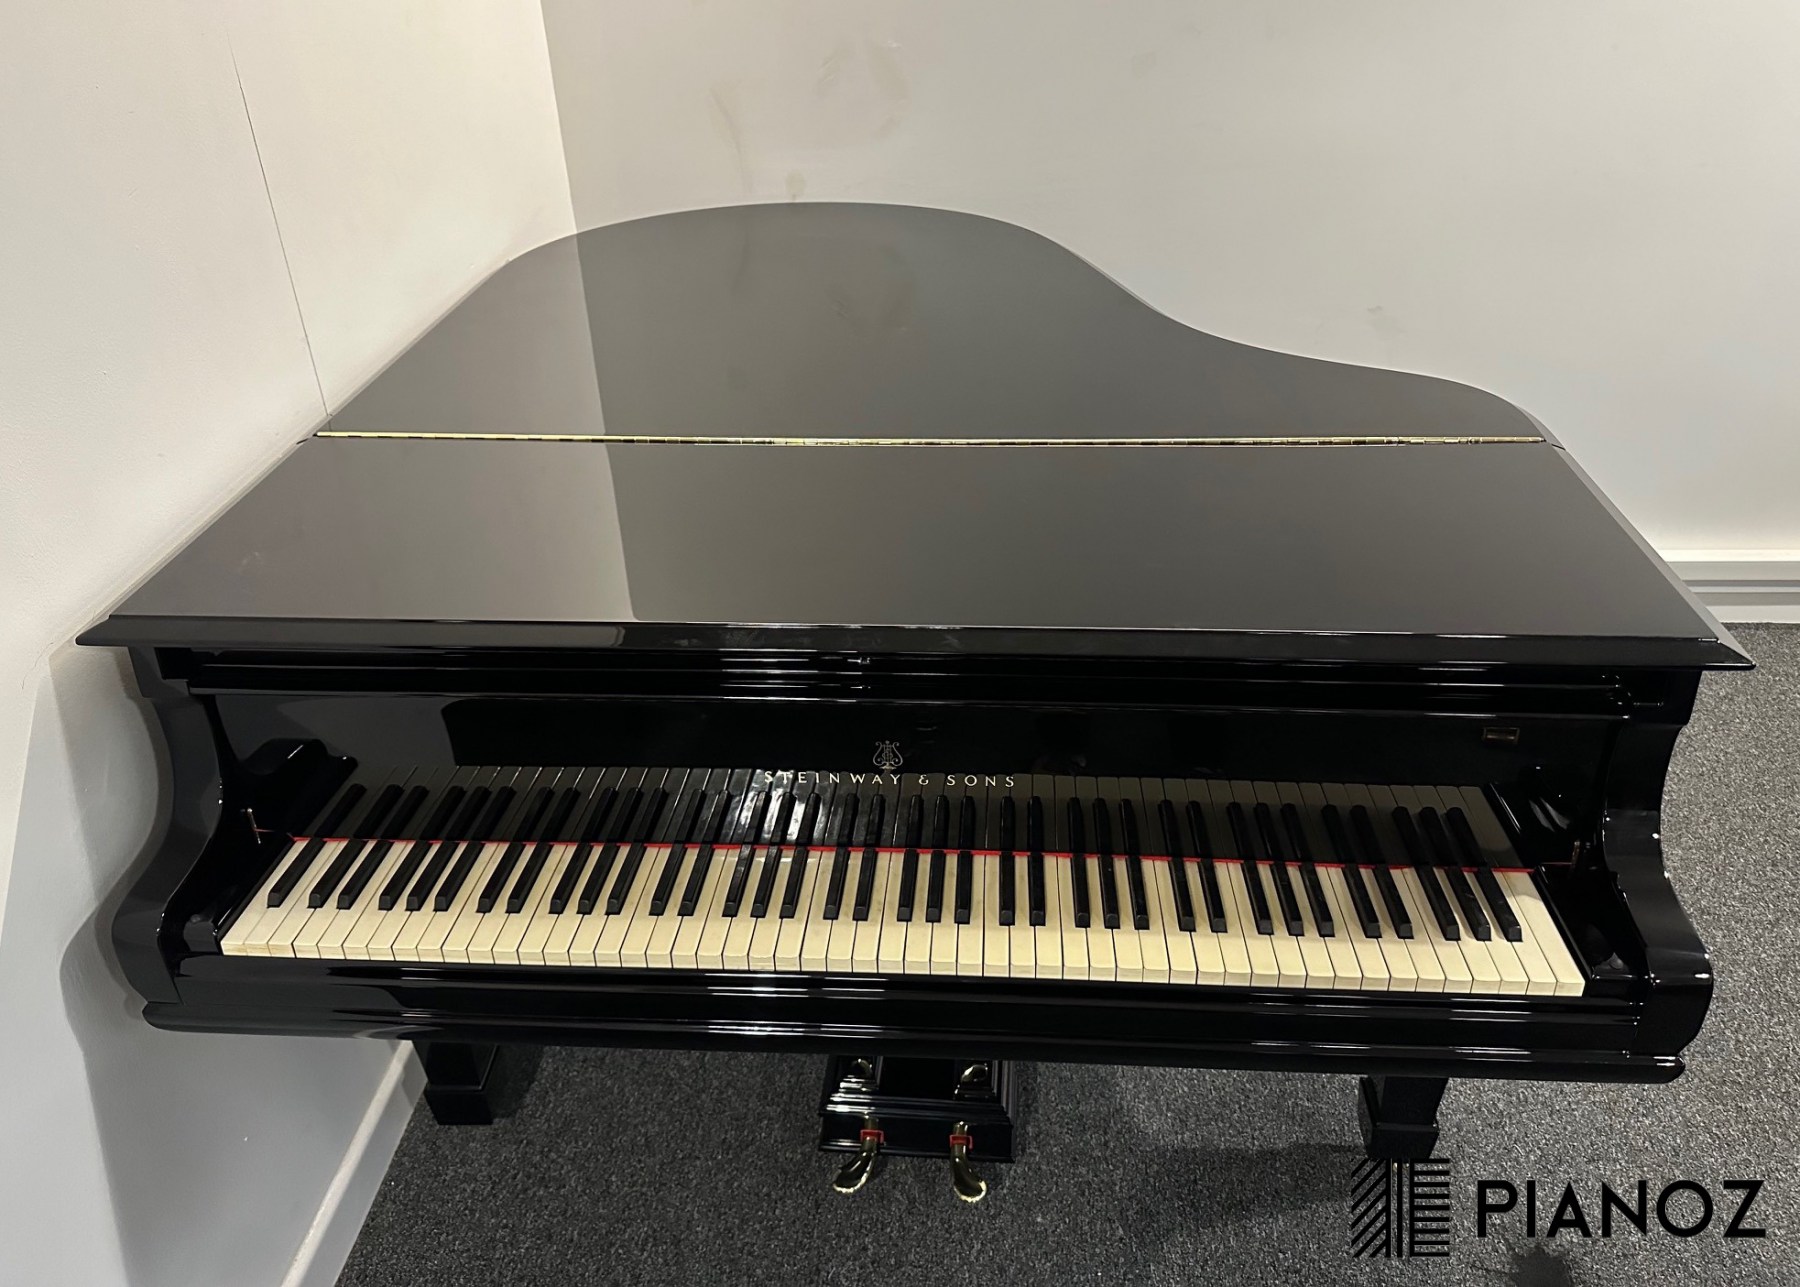 Steinway & Sons Model O Restored Grand Piano piano for sale in UK